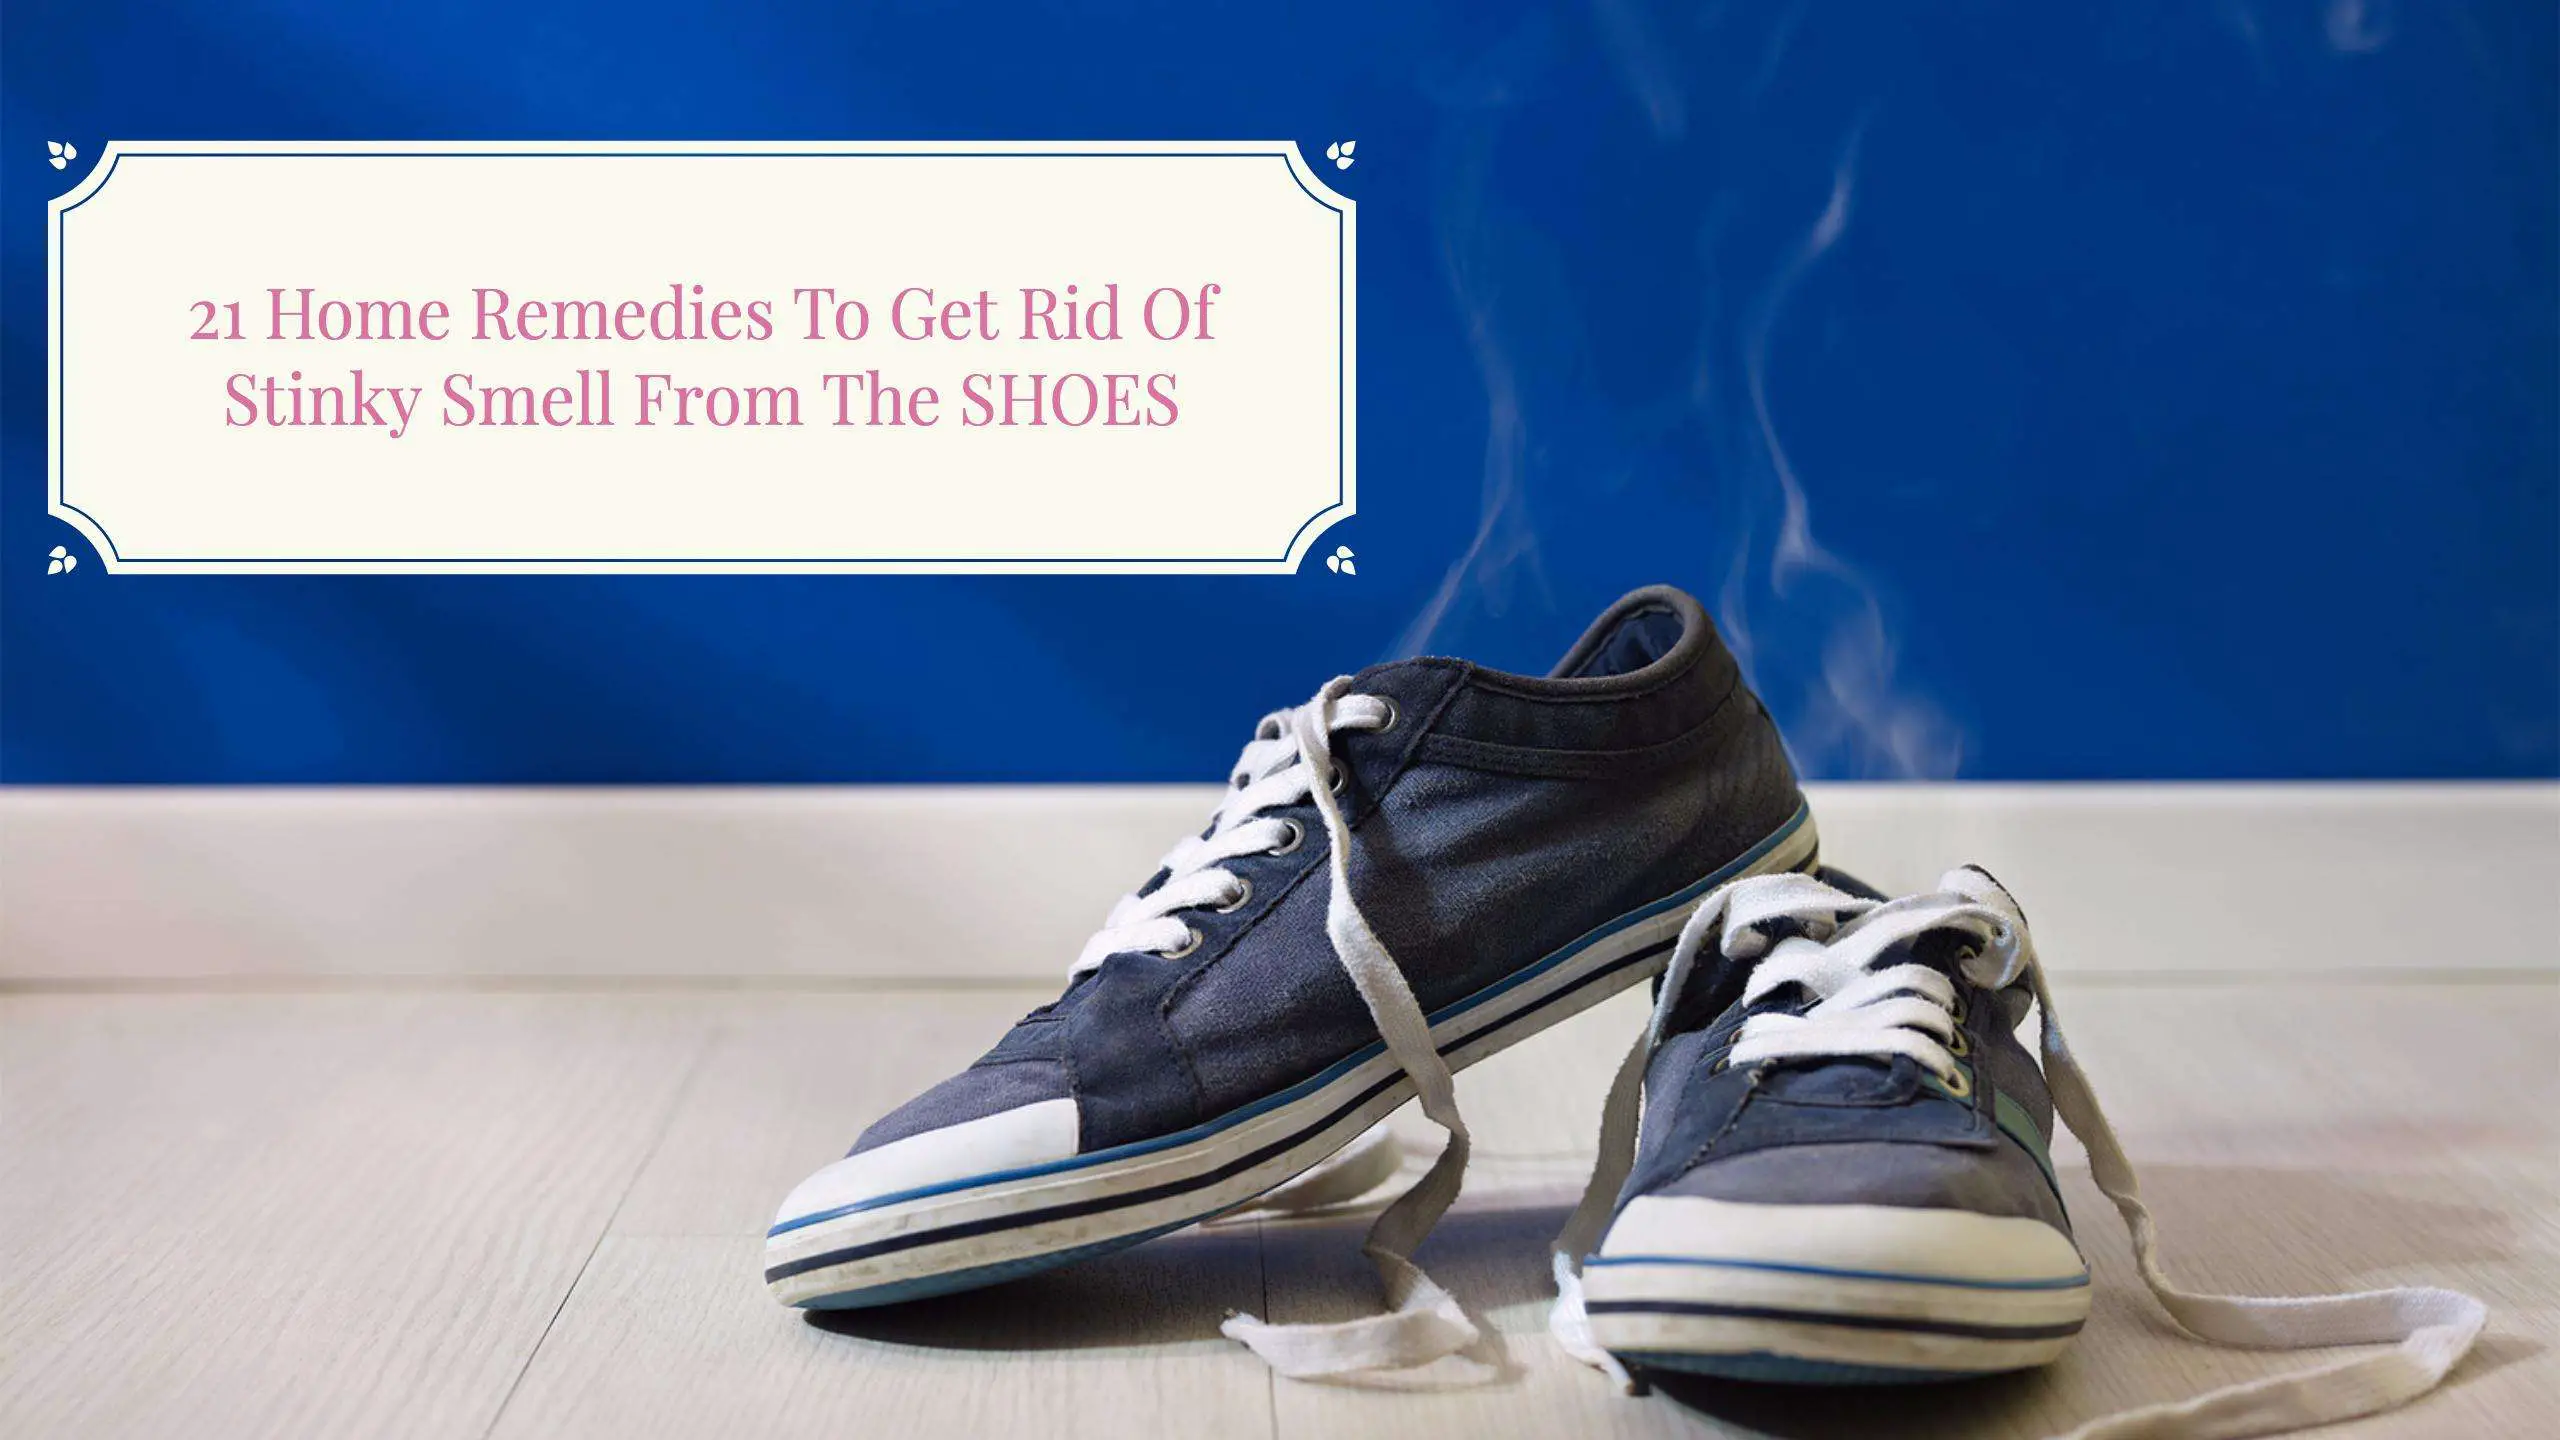 21 Home Remedies To Get Rid Of Stinky Smell From The SHOES